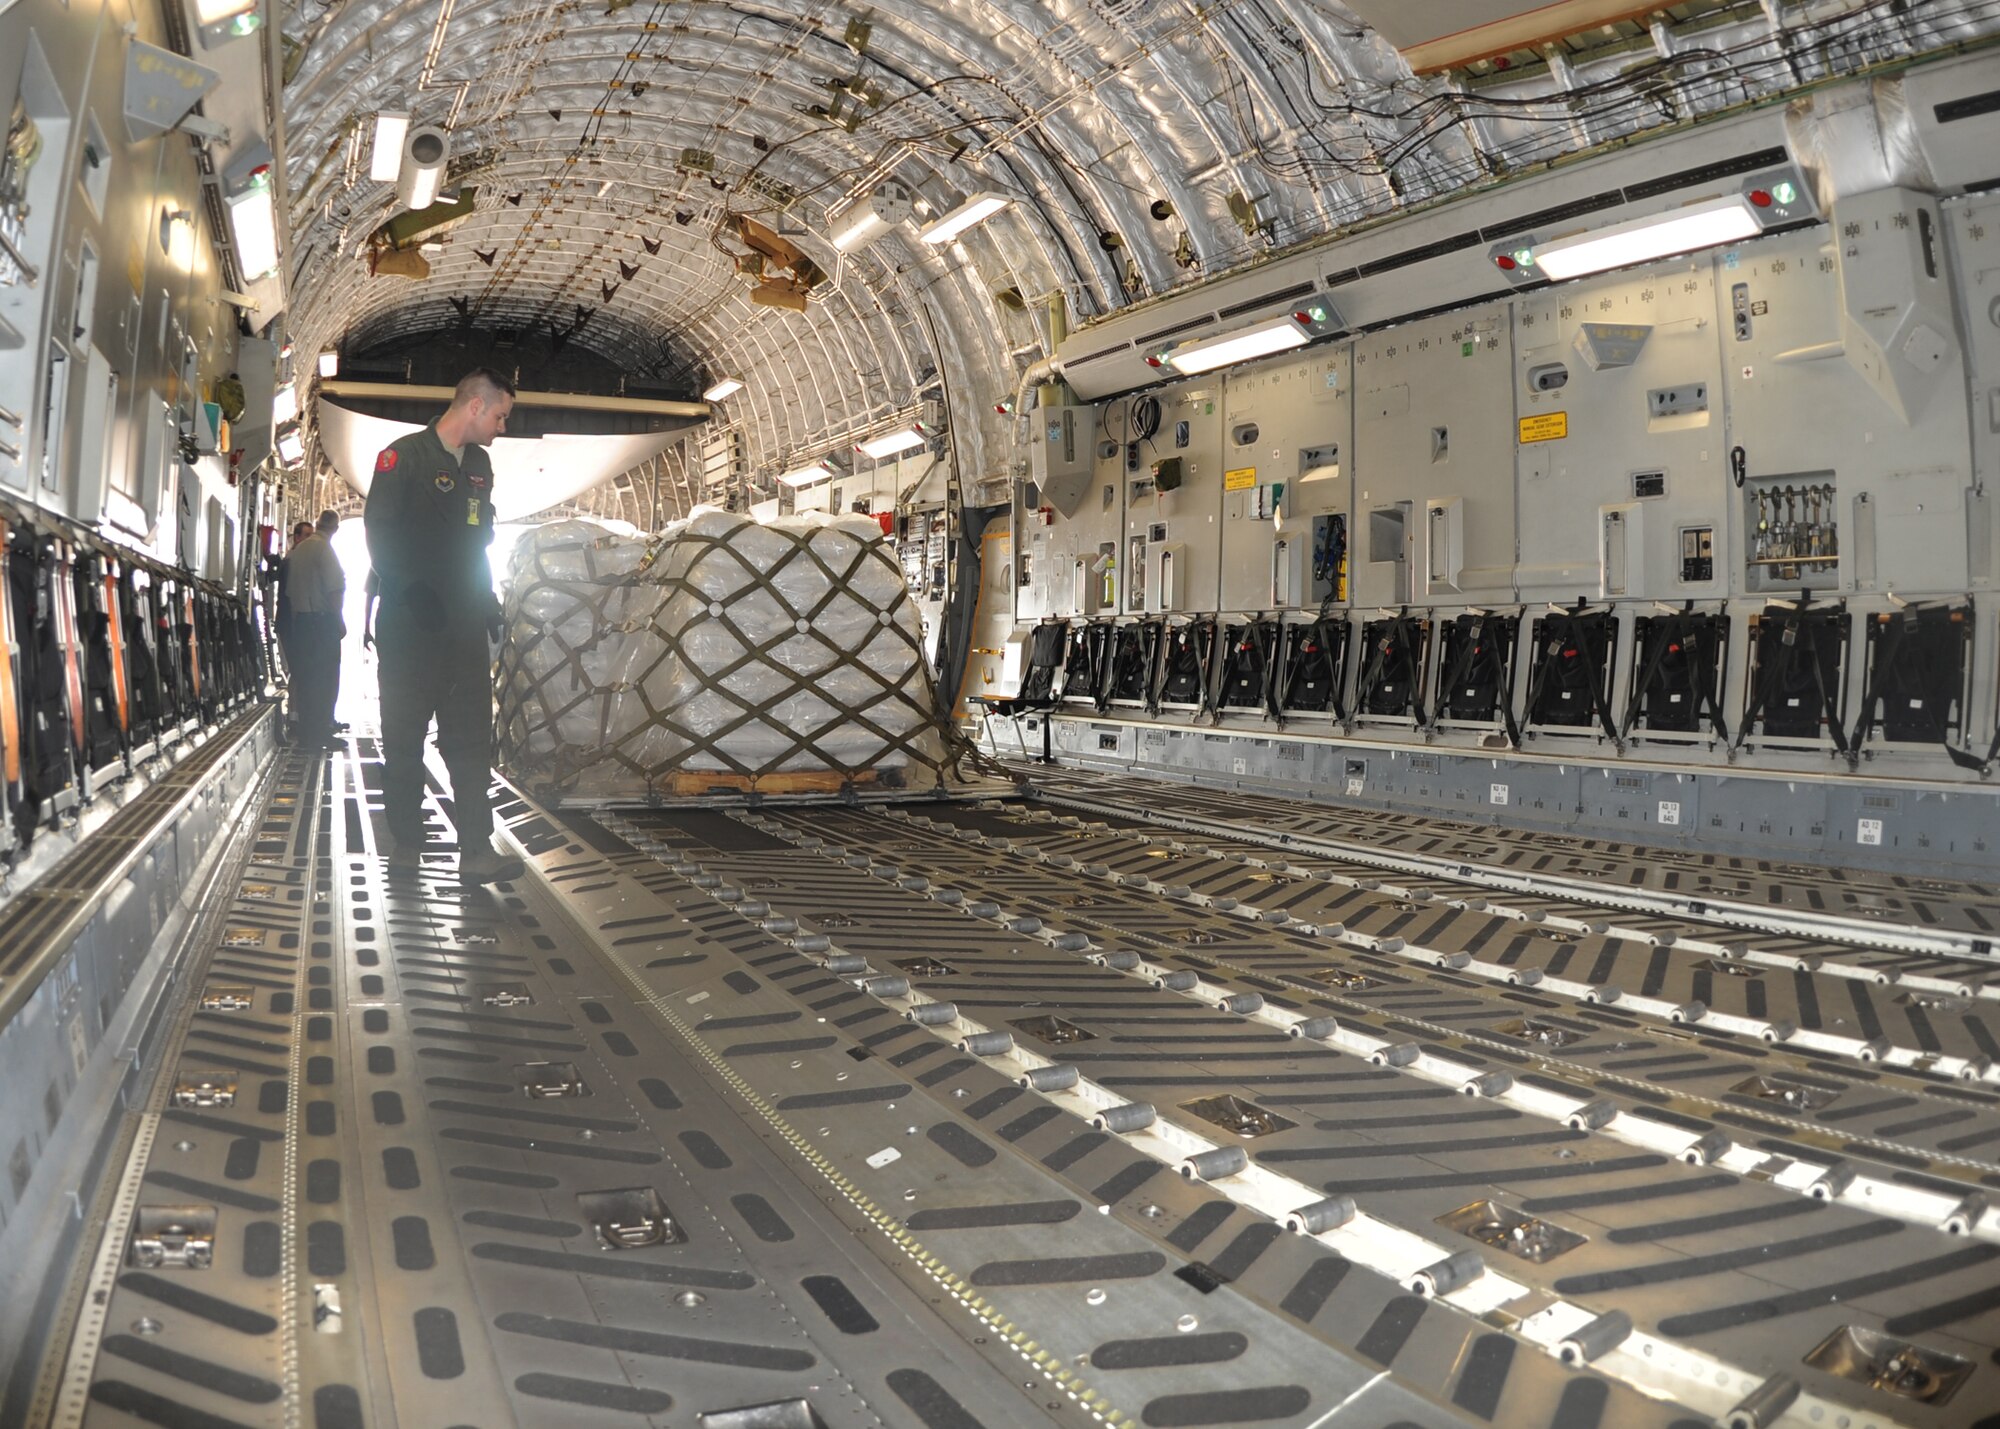 ALTUS AIR FORCE BASE, Okla. – Staff Sgt. William Morgan, 58th Airlift Squadron formal training unit instructor loadmaster, inspects a pallet of split beans on a C-17 Globemaster III as part of a delivery to Haiti, June 22, 2012. The Denton Amendment allows for the Department of Defense to transport privately-donated humanitarian cargo to foreign countries using military aircraft on a space available basis. (U.S. Air Force photo by Airman 1st Class Franklin R. Ramos / 97th Air Mobility Wing / Released)